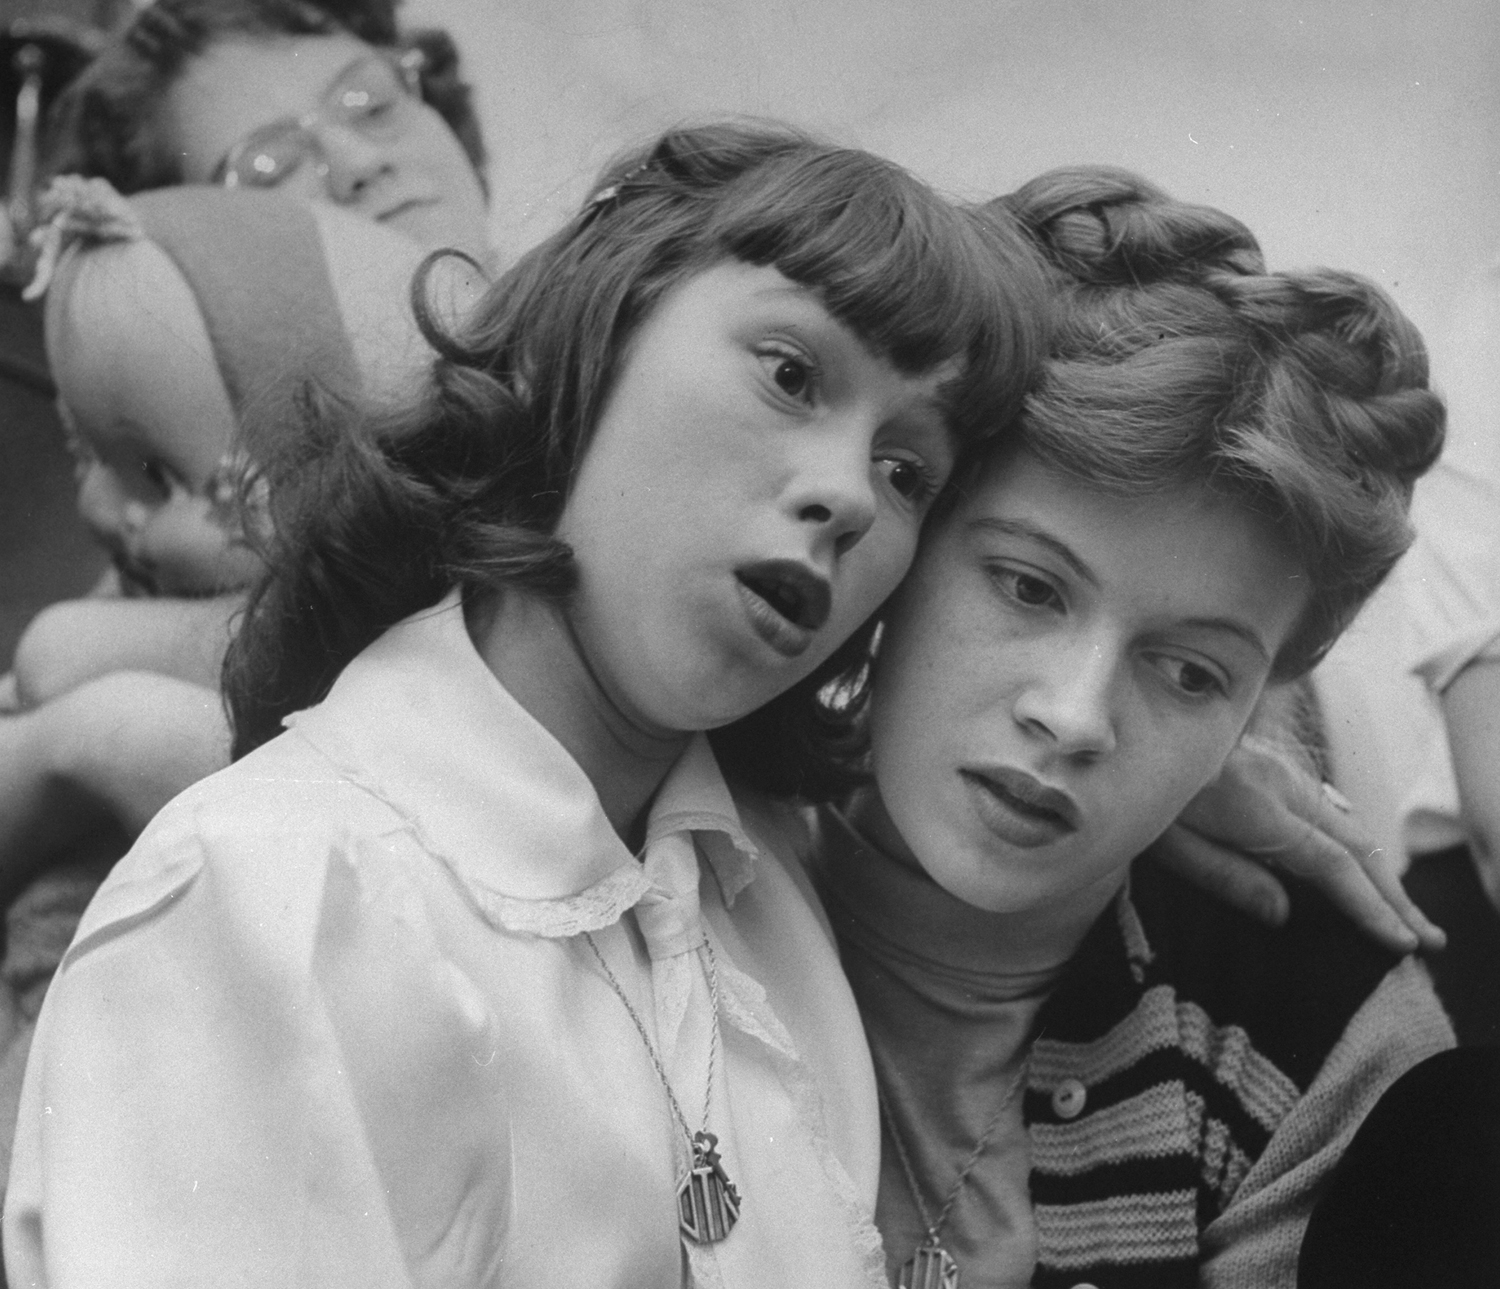 Two Cleveland high schoolers at a record-playing meeting of a Frankie Laine fan club, 1948.